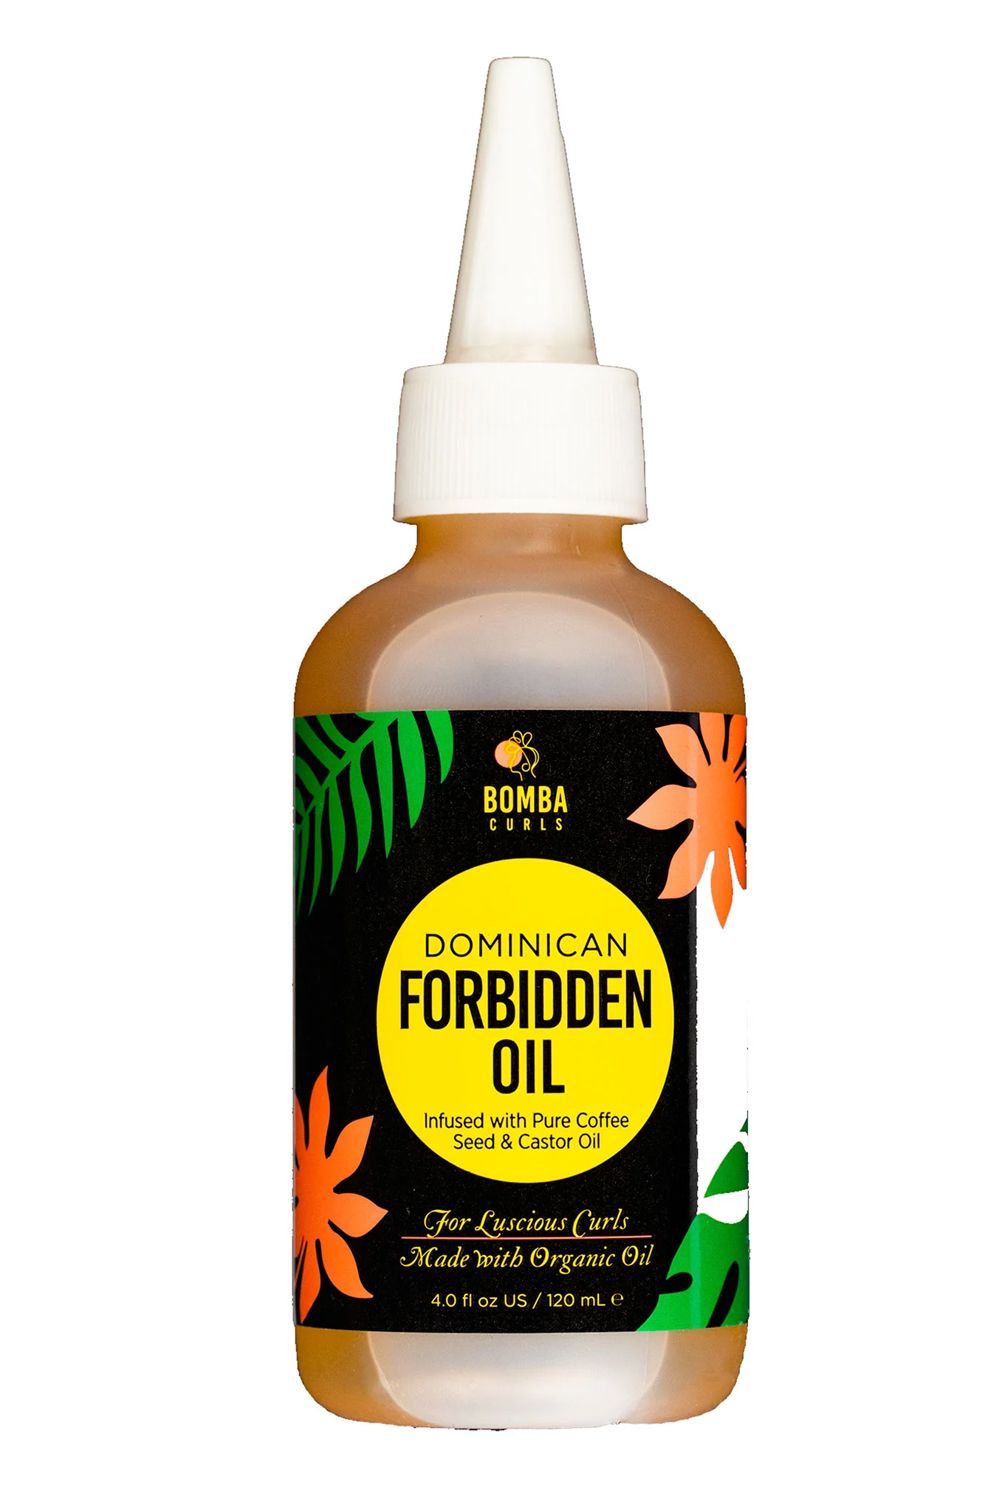 15 Best Organic and All-Natural Hair Products of 2022